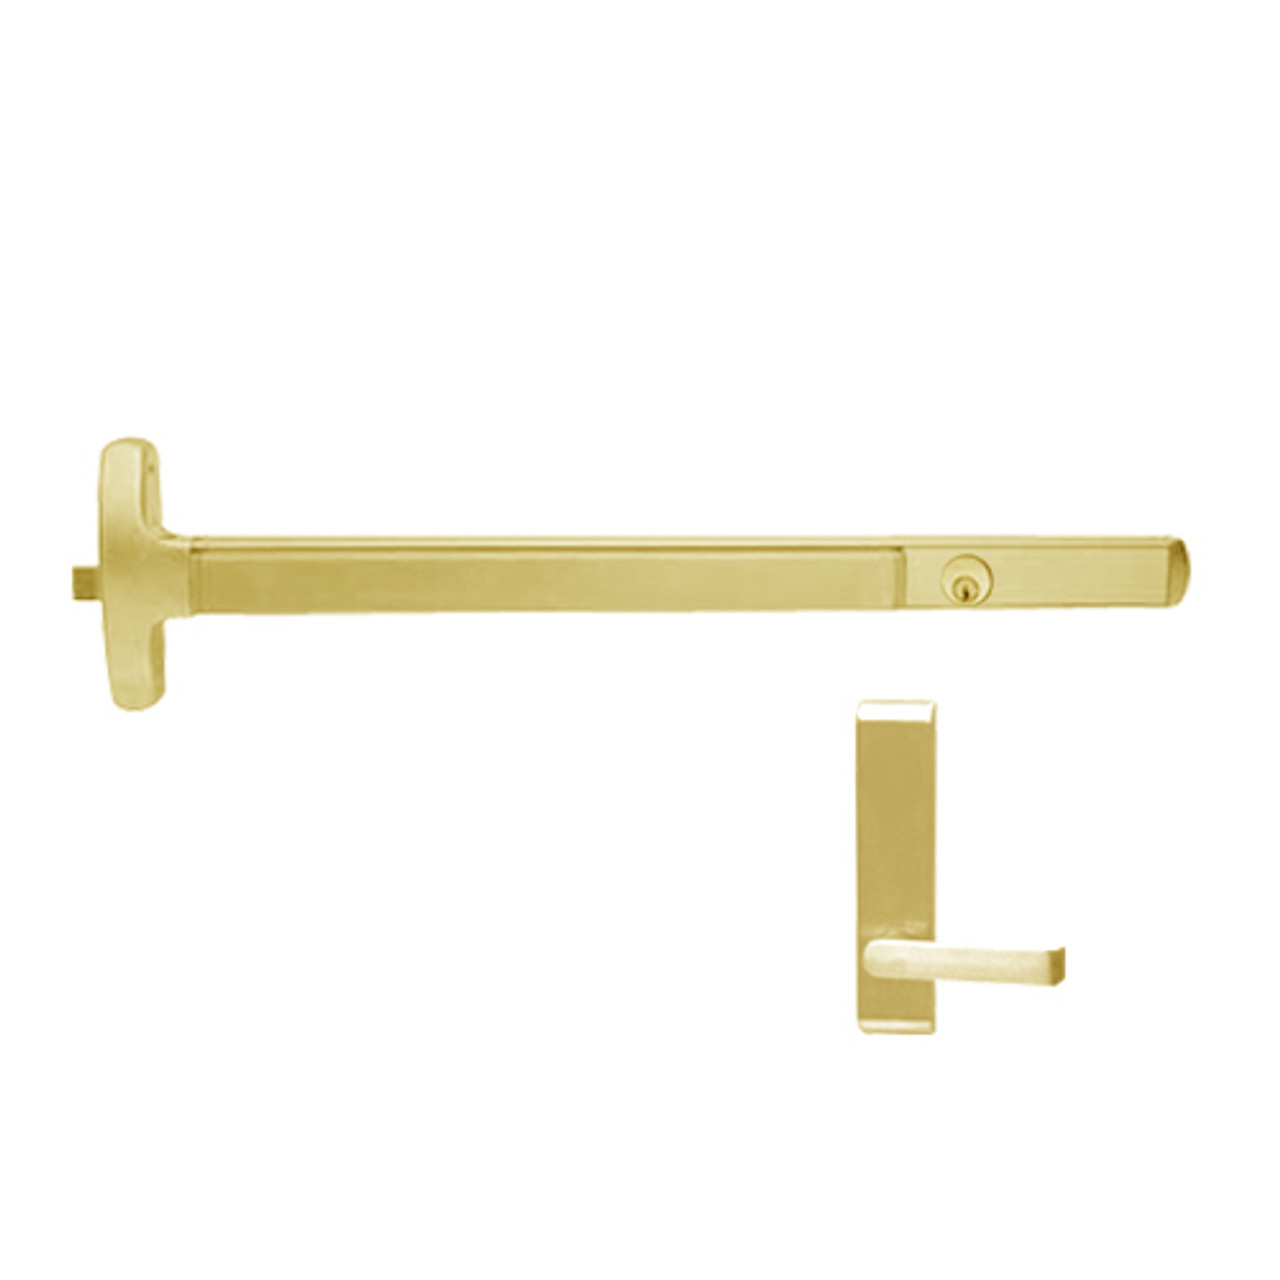 CD24-R-L-BE-DANE-US3-4-RHR Falcon Exit Device in Polished Brass